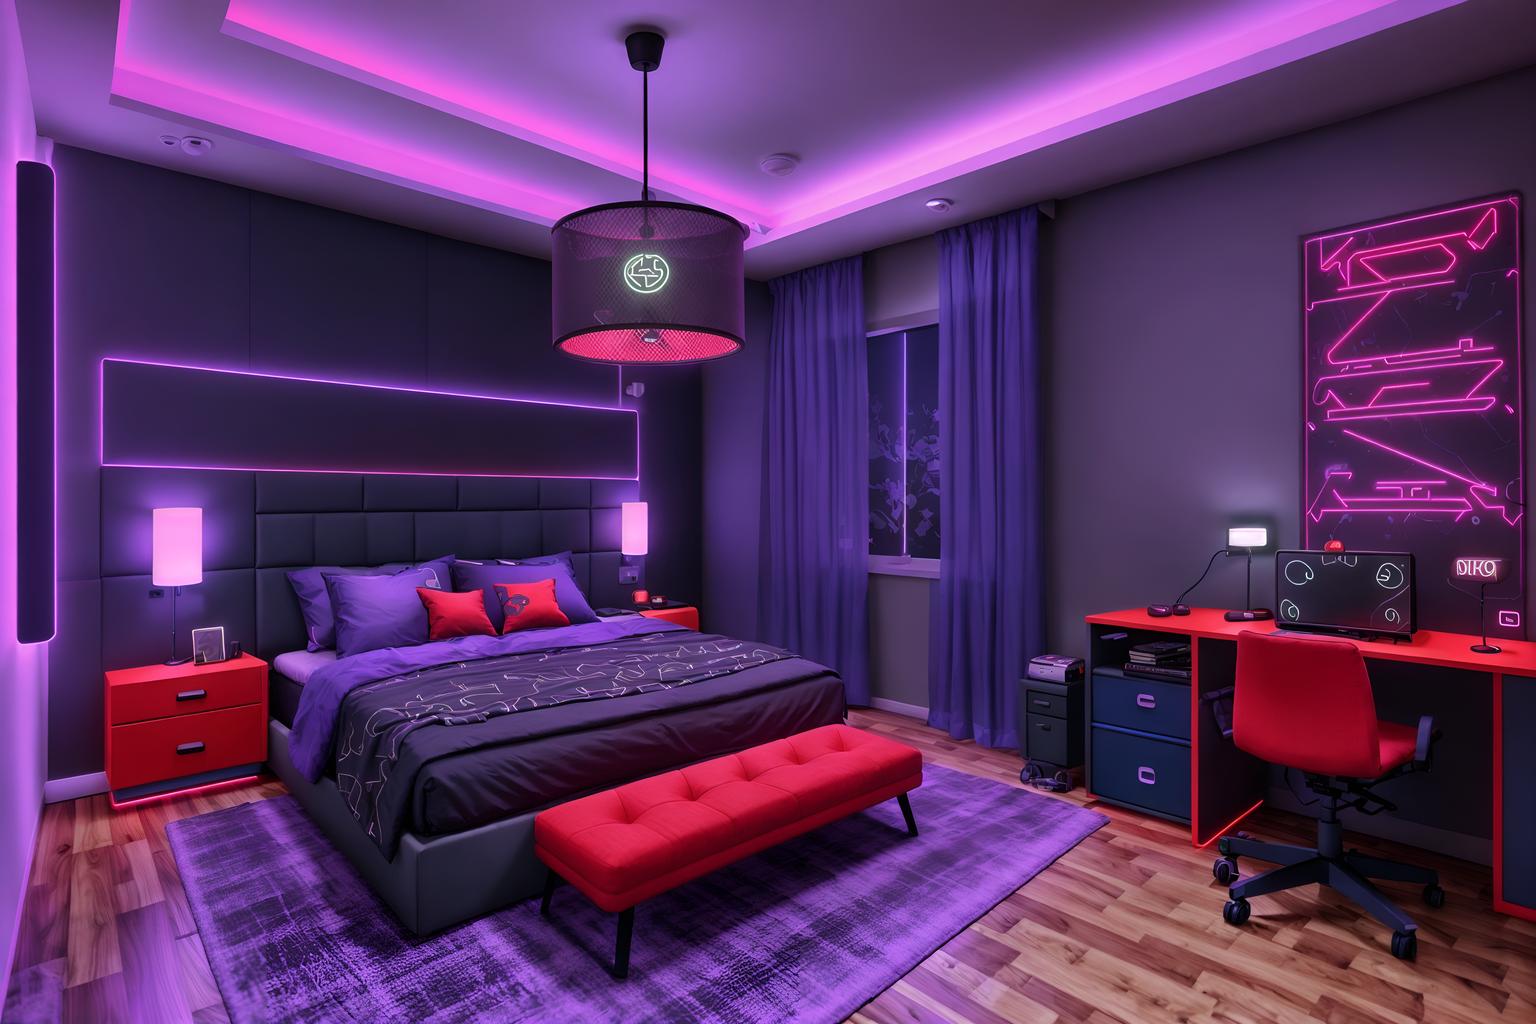 gaming room-style (bedroom interior) with storage bench or ottoman and accent chair and bed and bedside table or night stand and dresser closet and night light and mirror and headboard. . with purple and red lights and gaming chair and at night and purple, red and blue fade light and dark walls and neon letters on wall and neon lights and speakers. . cinematic photo, highly detailed, cinematic lighting, ultra-detailed, ultrarealistic, photorealism, 8k. gaming room interior design style. masterpiece, cinematic light, ultrarealistic+, photorealistic+, 8k, raw photo, realistic, sharp focus on eyes, (symmetrical eyes), (intact eyes), hyperrealistic, highest quality, best quality, , highly detailed, masterpiece, best quality, extremely detailed 8k wallpaper, masterpiece, best quality, ultra-detailed, best shadow, detailed background, detailed face, detailed eyes, high contrast, best illumination, detailed face, dulux, caustic, dynamic angle, detailed glow. dramatic lighting. highly detailed, insanely detailed hair, symmetrical, intricate details, professionally retouched, 8k high definition. strong bokeh. award winning photo.